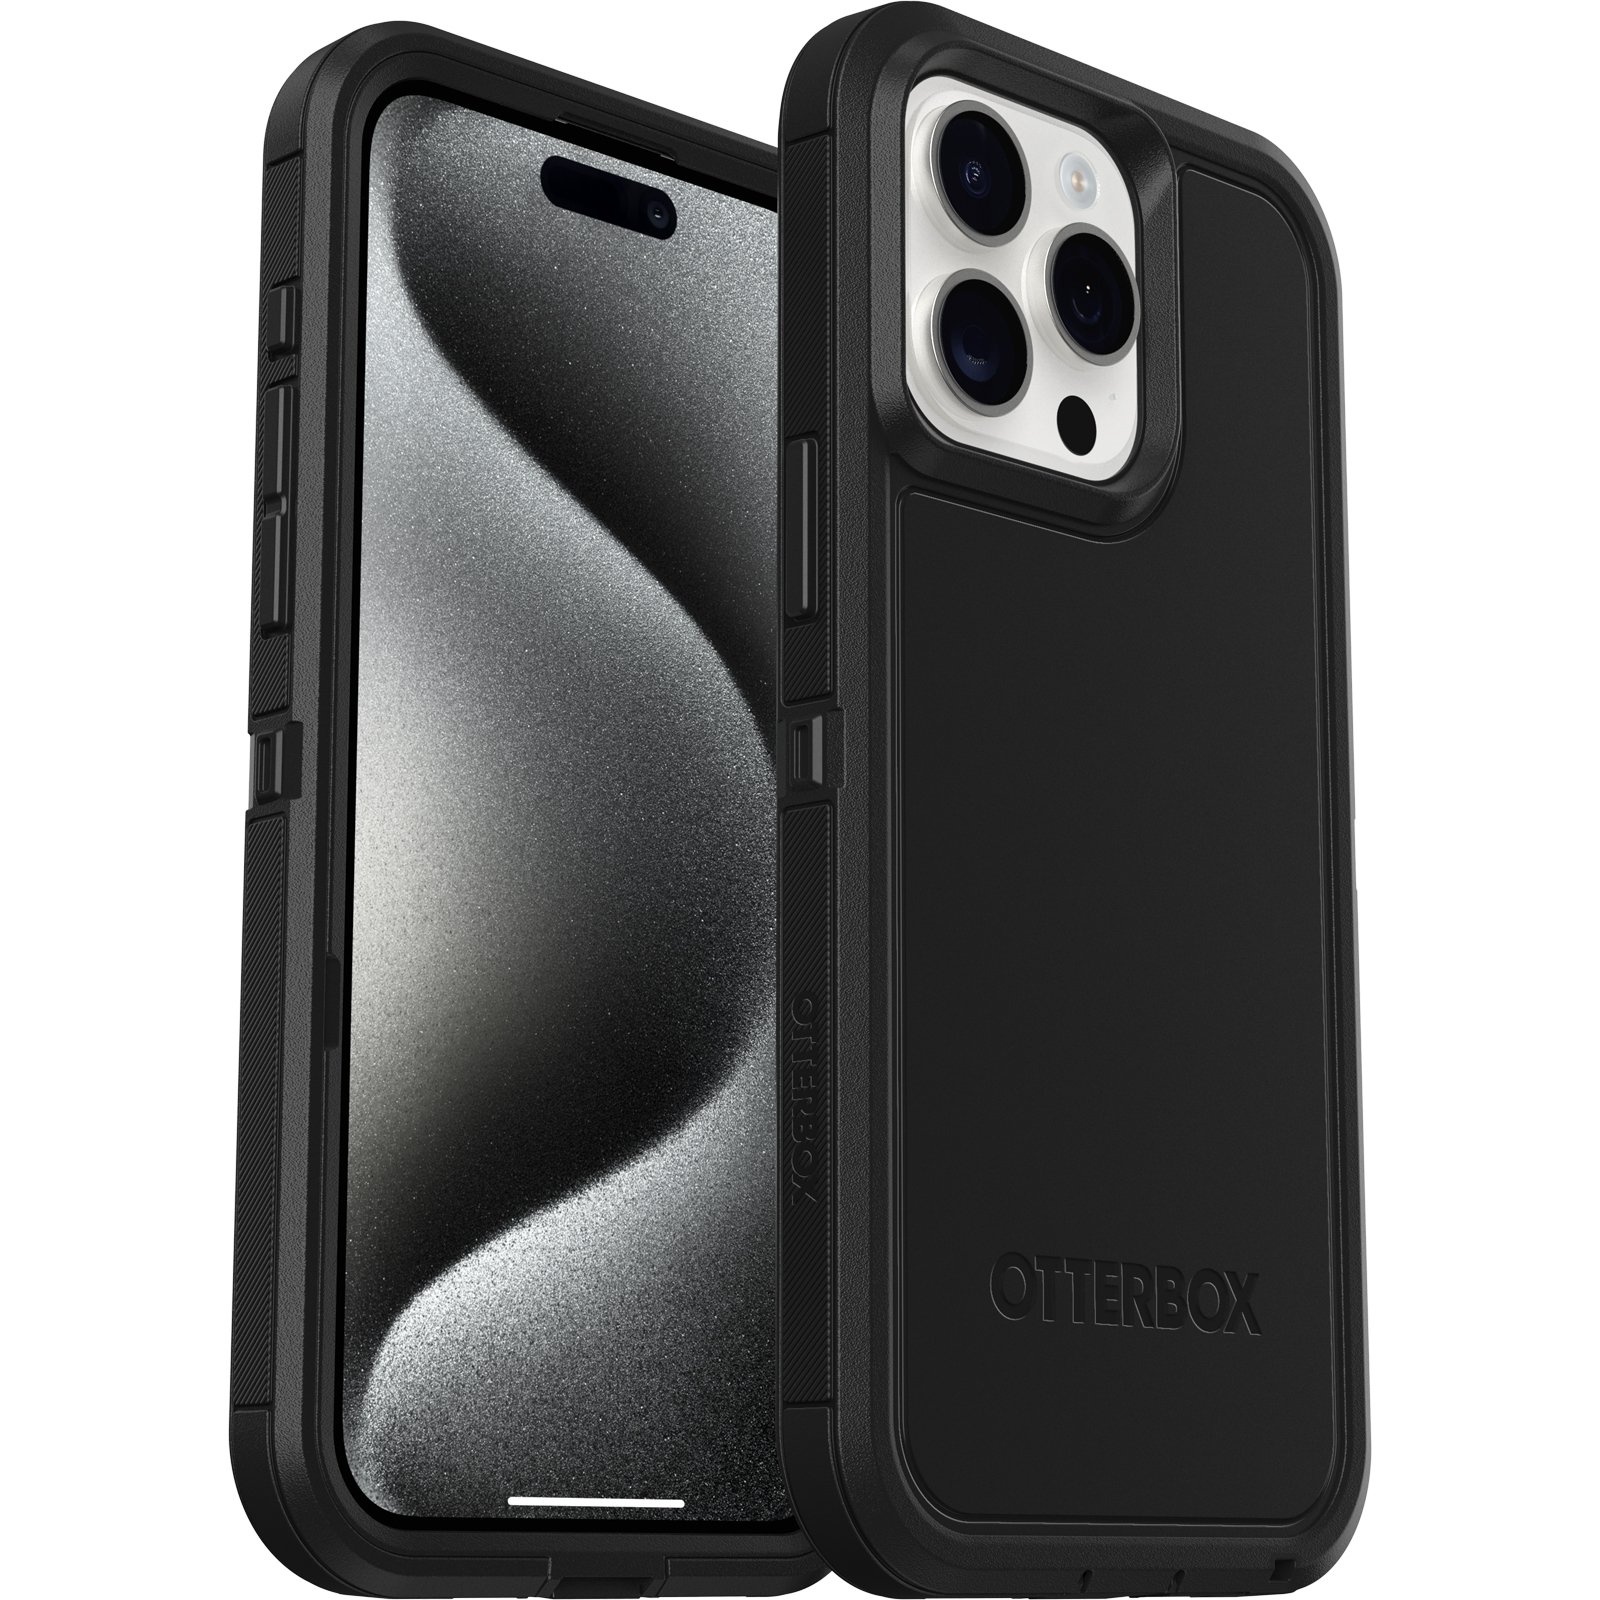 OtterBox iPhone 15, iPhone 14, and iPhone 13 Defender Series Case - BLACK,  Screenless, Rugged & Durable, with Port Protection, Includes Holster Clip